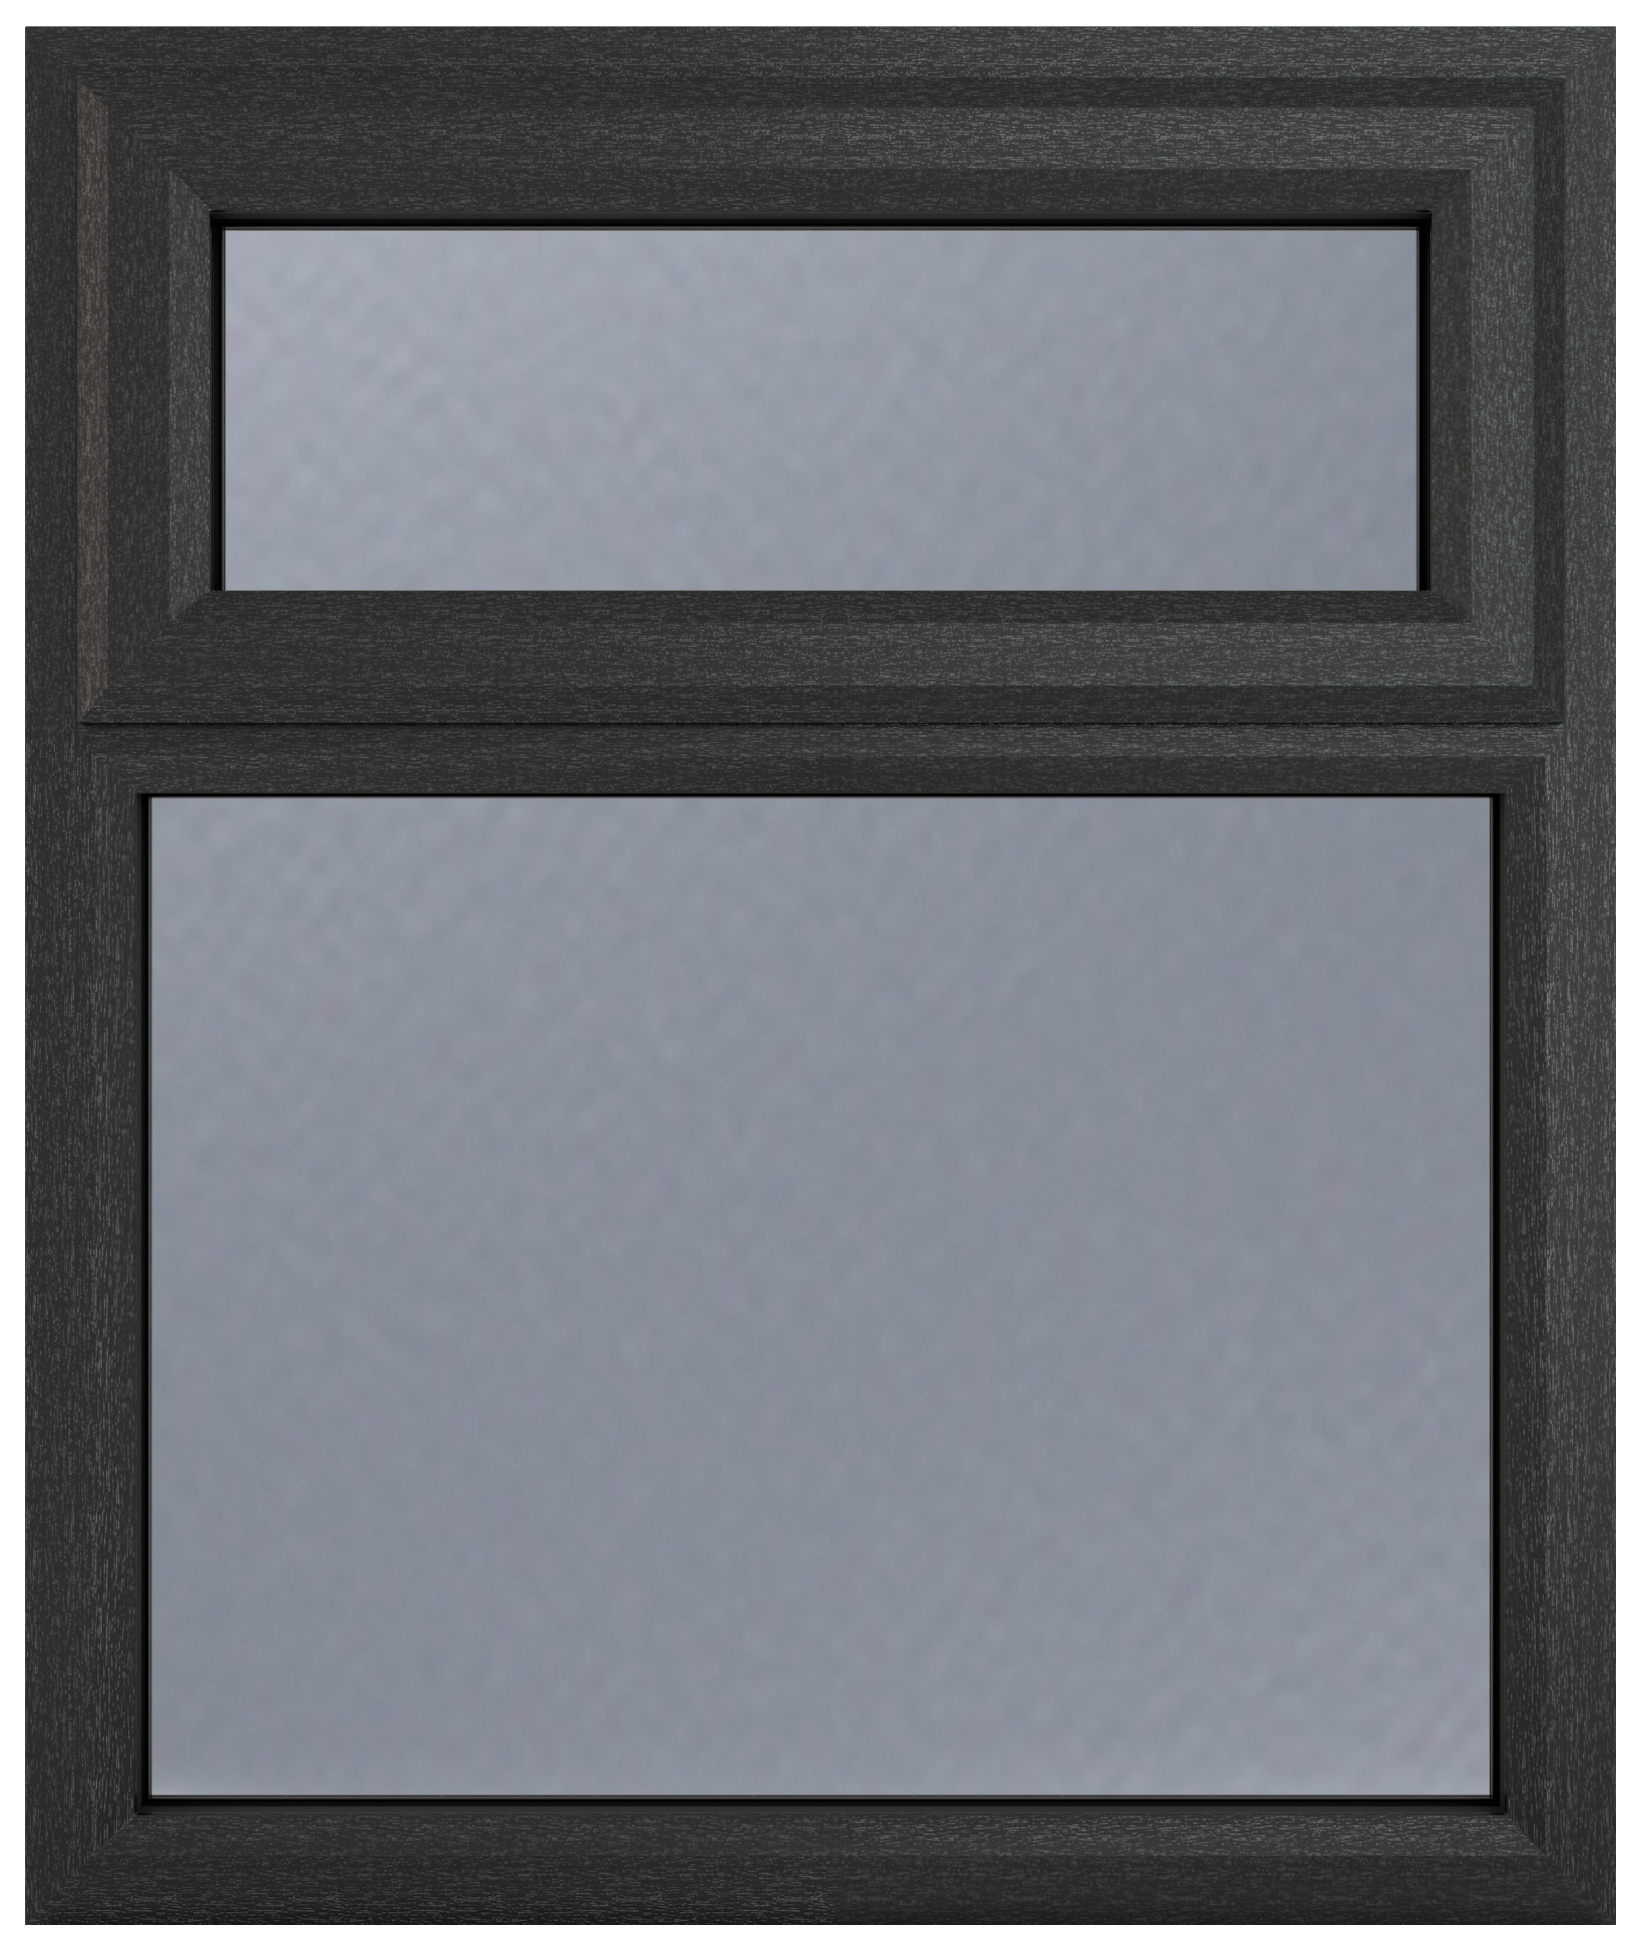 Crystal uPVC Grey Top Hung Opener Obscure Double Glazed Fixed Light Window - 905 x 965mm